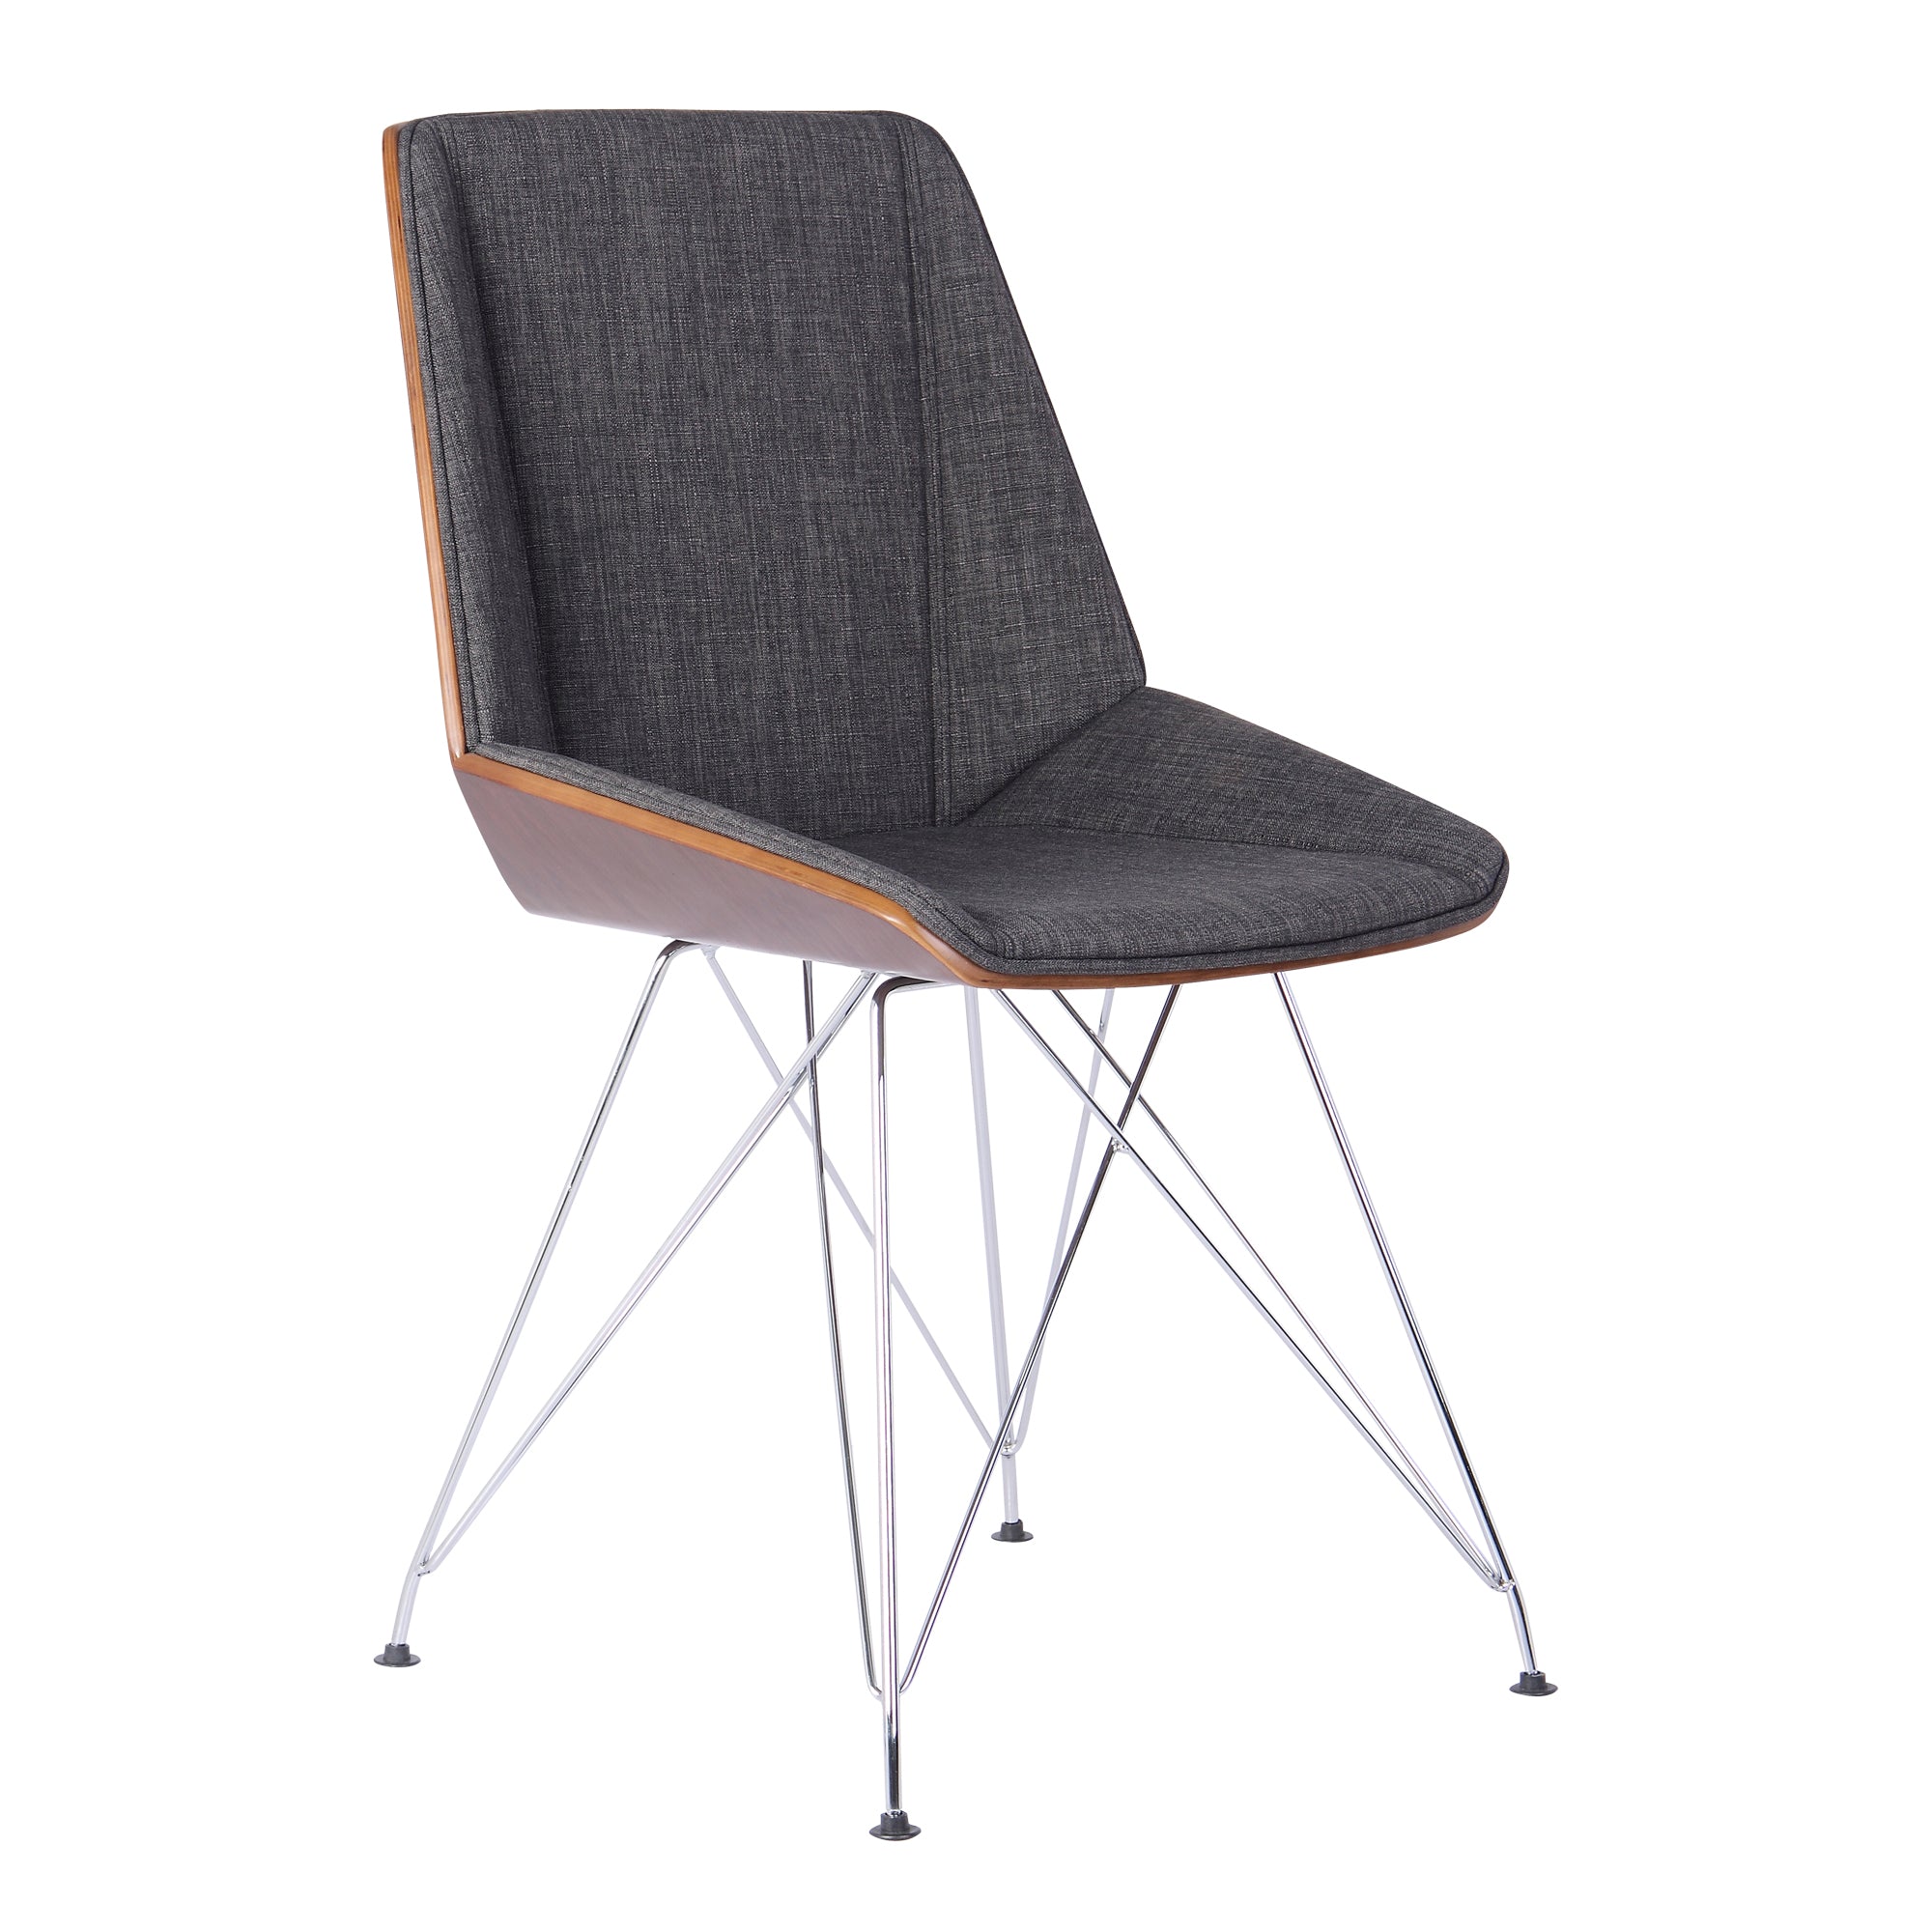 Armen Living Lcpachwach Pandora Chair In Chrome Finish With Walnut Wood And Charcoal Fabric